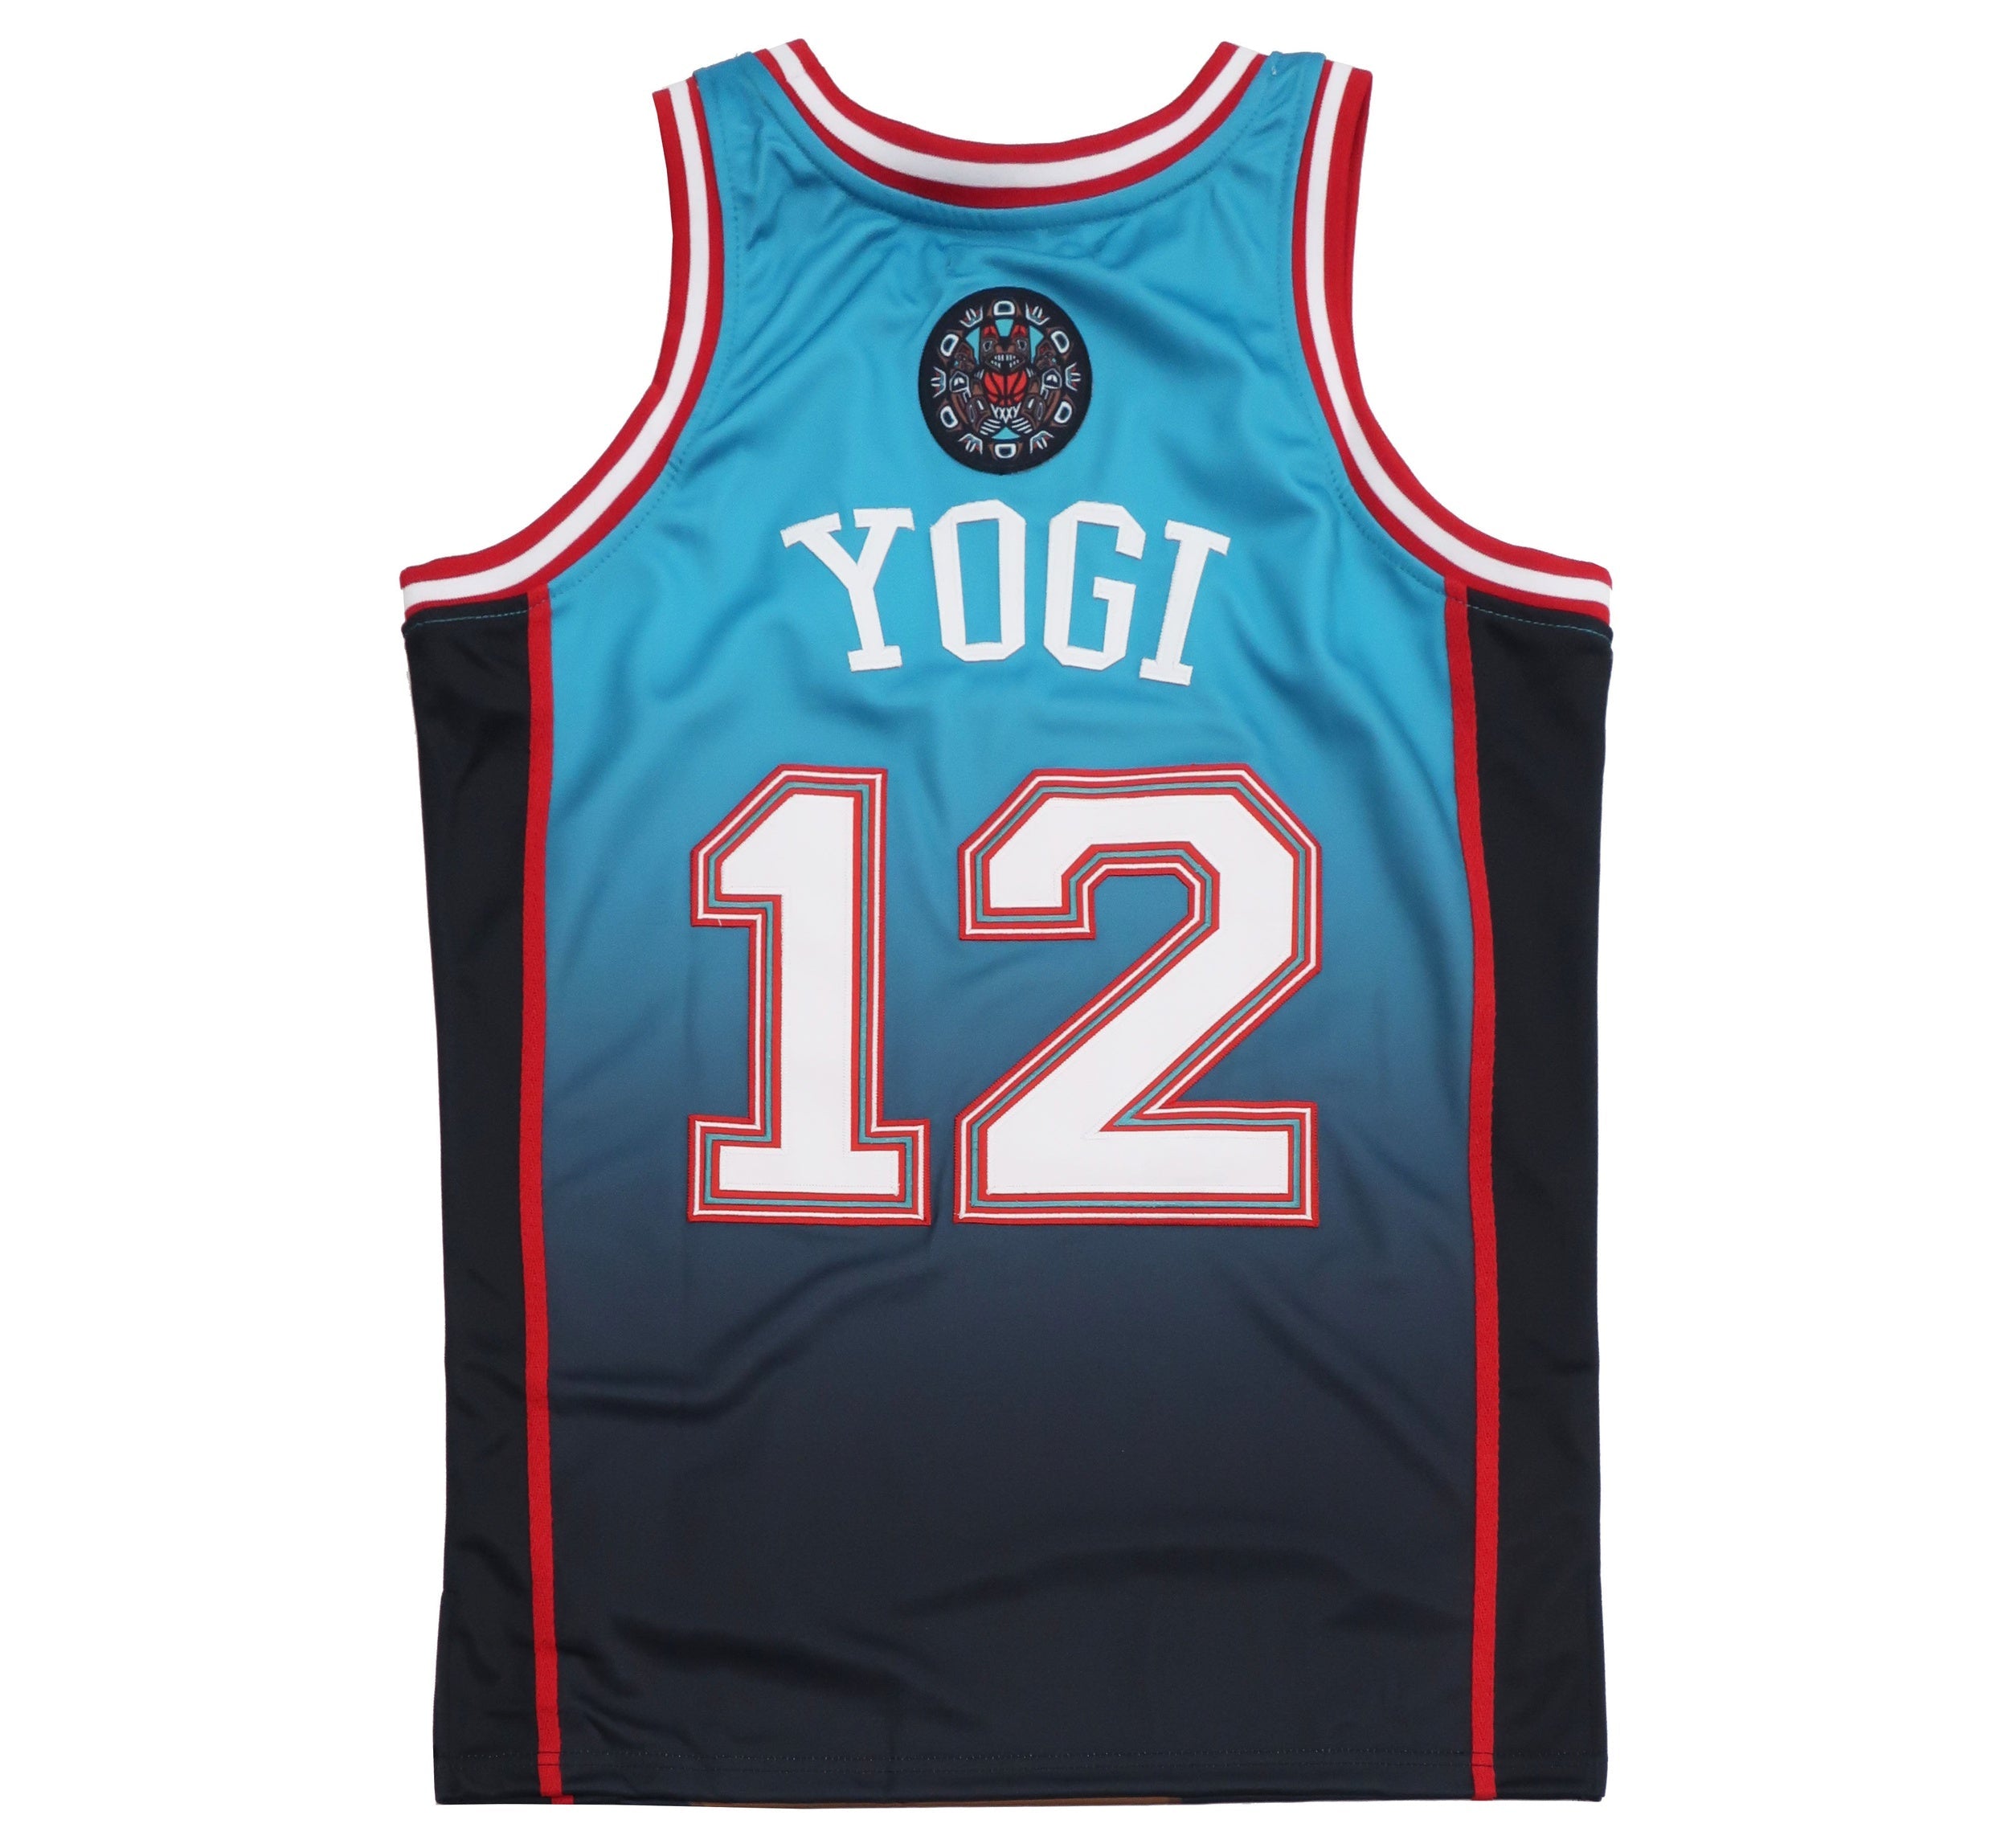 Wholesale Courage the Cowardly Dog Basketball Jersey